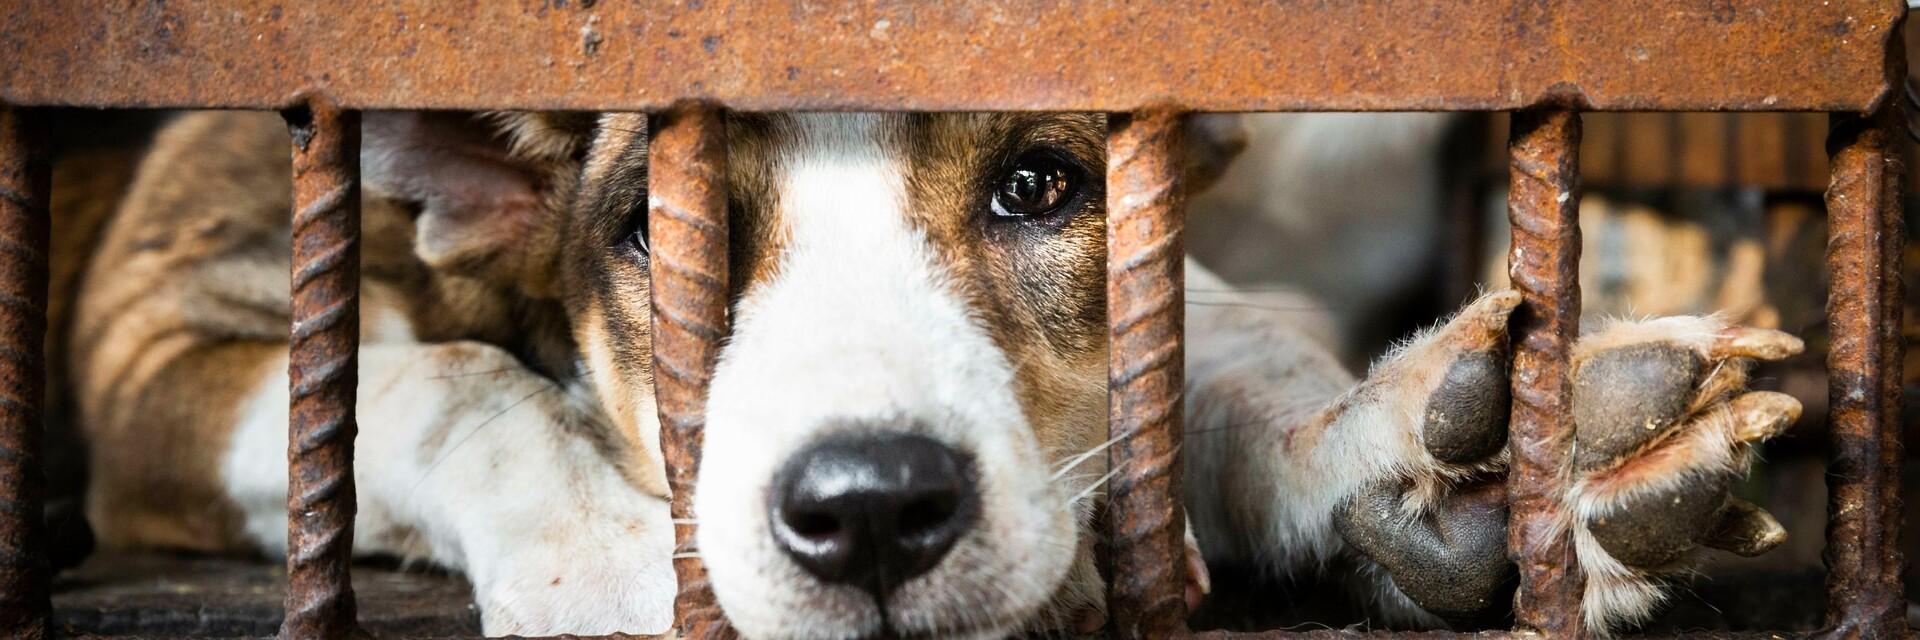 Dog in a cage in Southeast Asia 